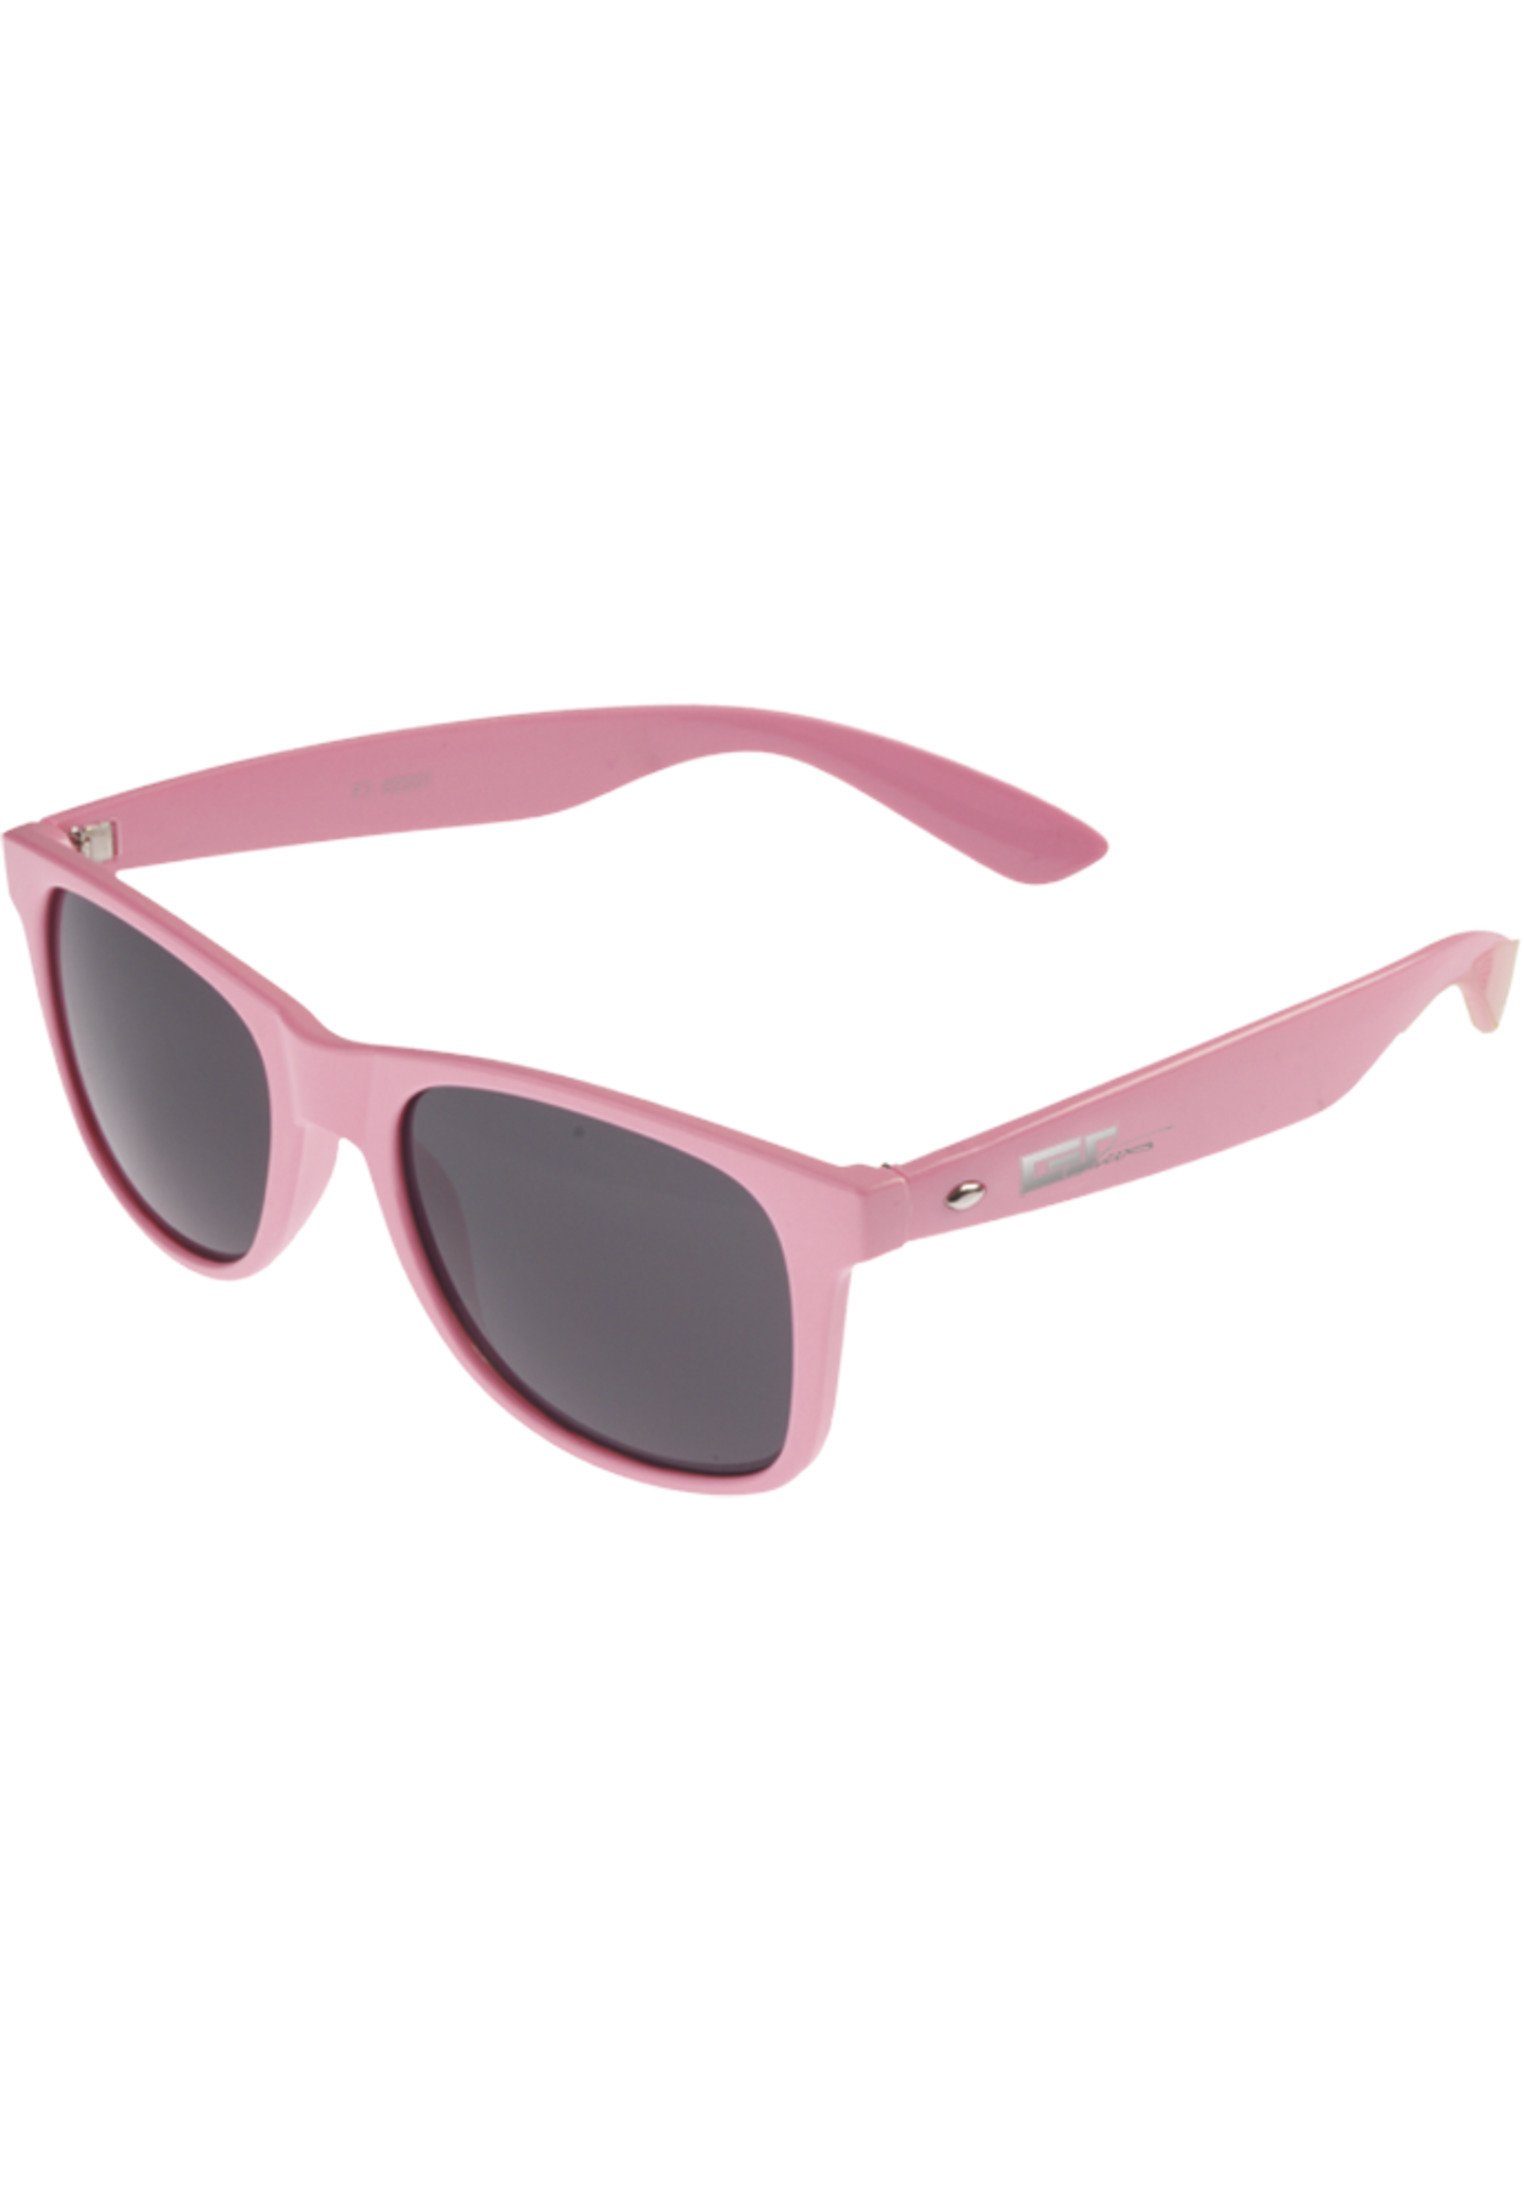 MSTRDS Sonnenbrille Accessoires neonpink Groove Shades GStwo